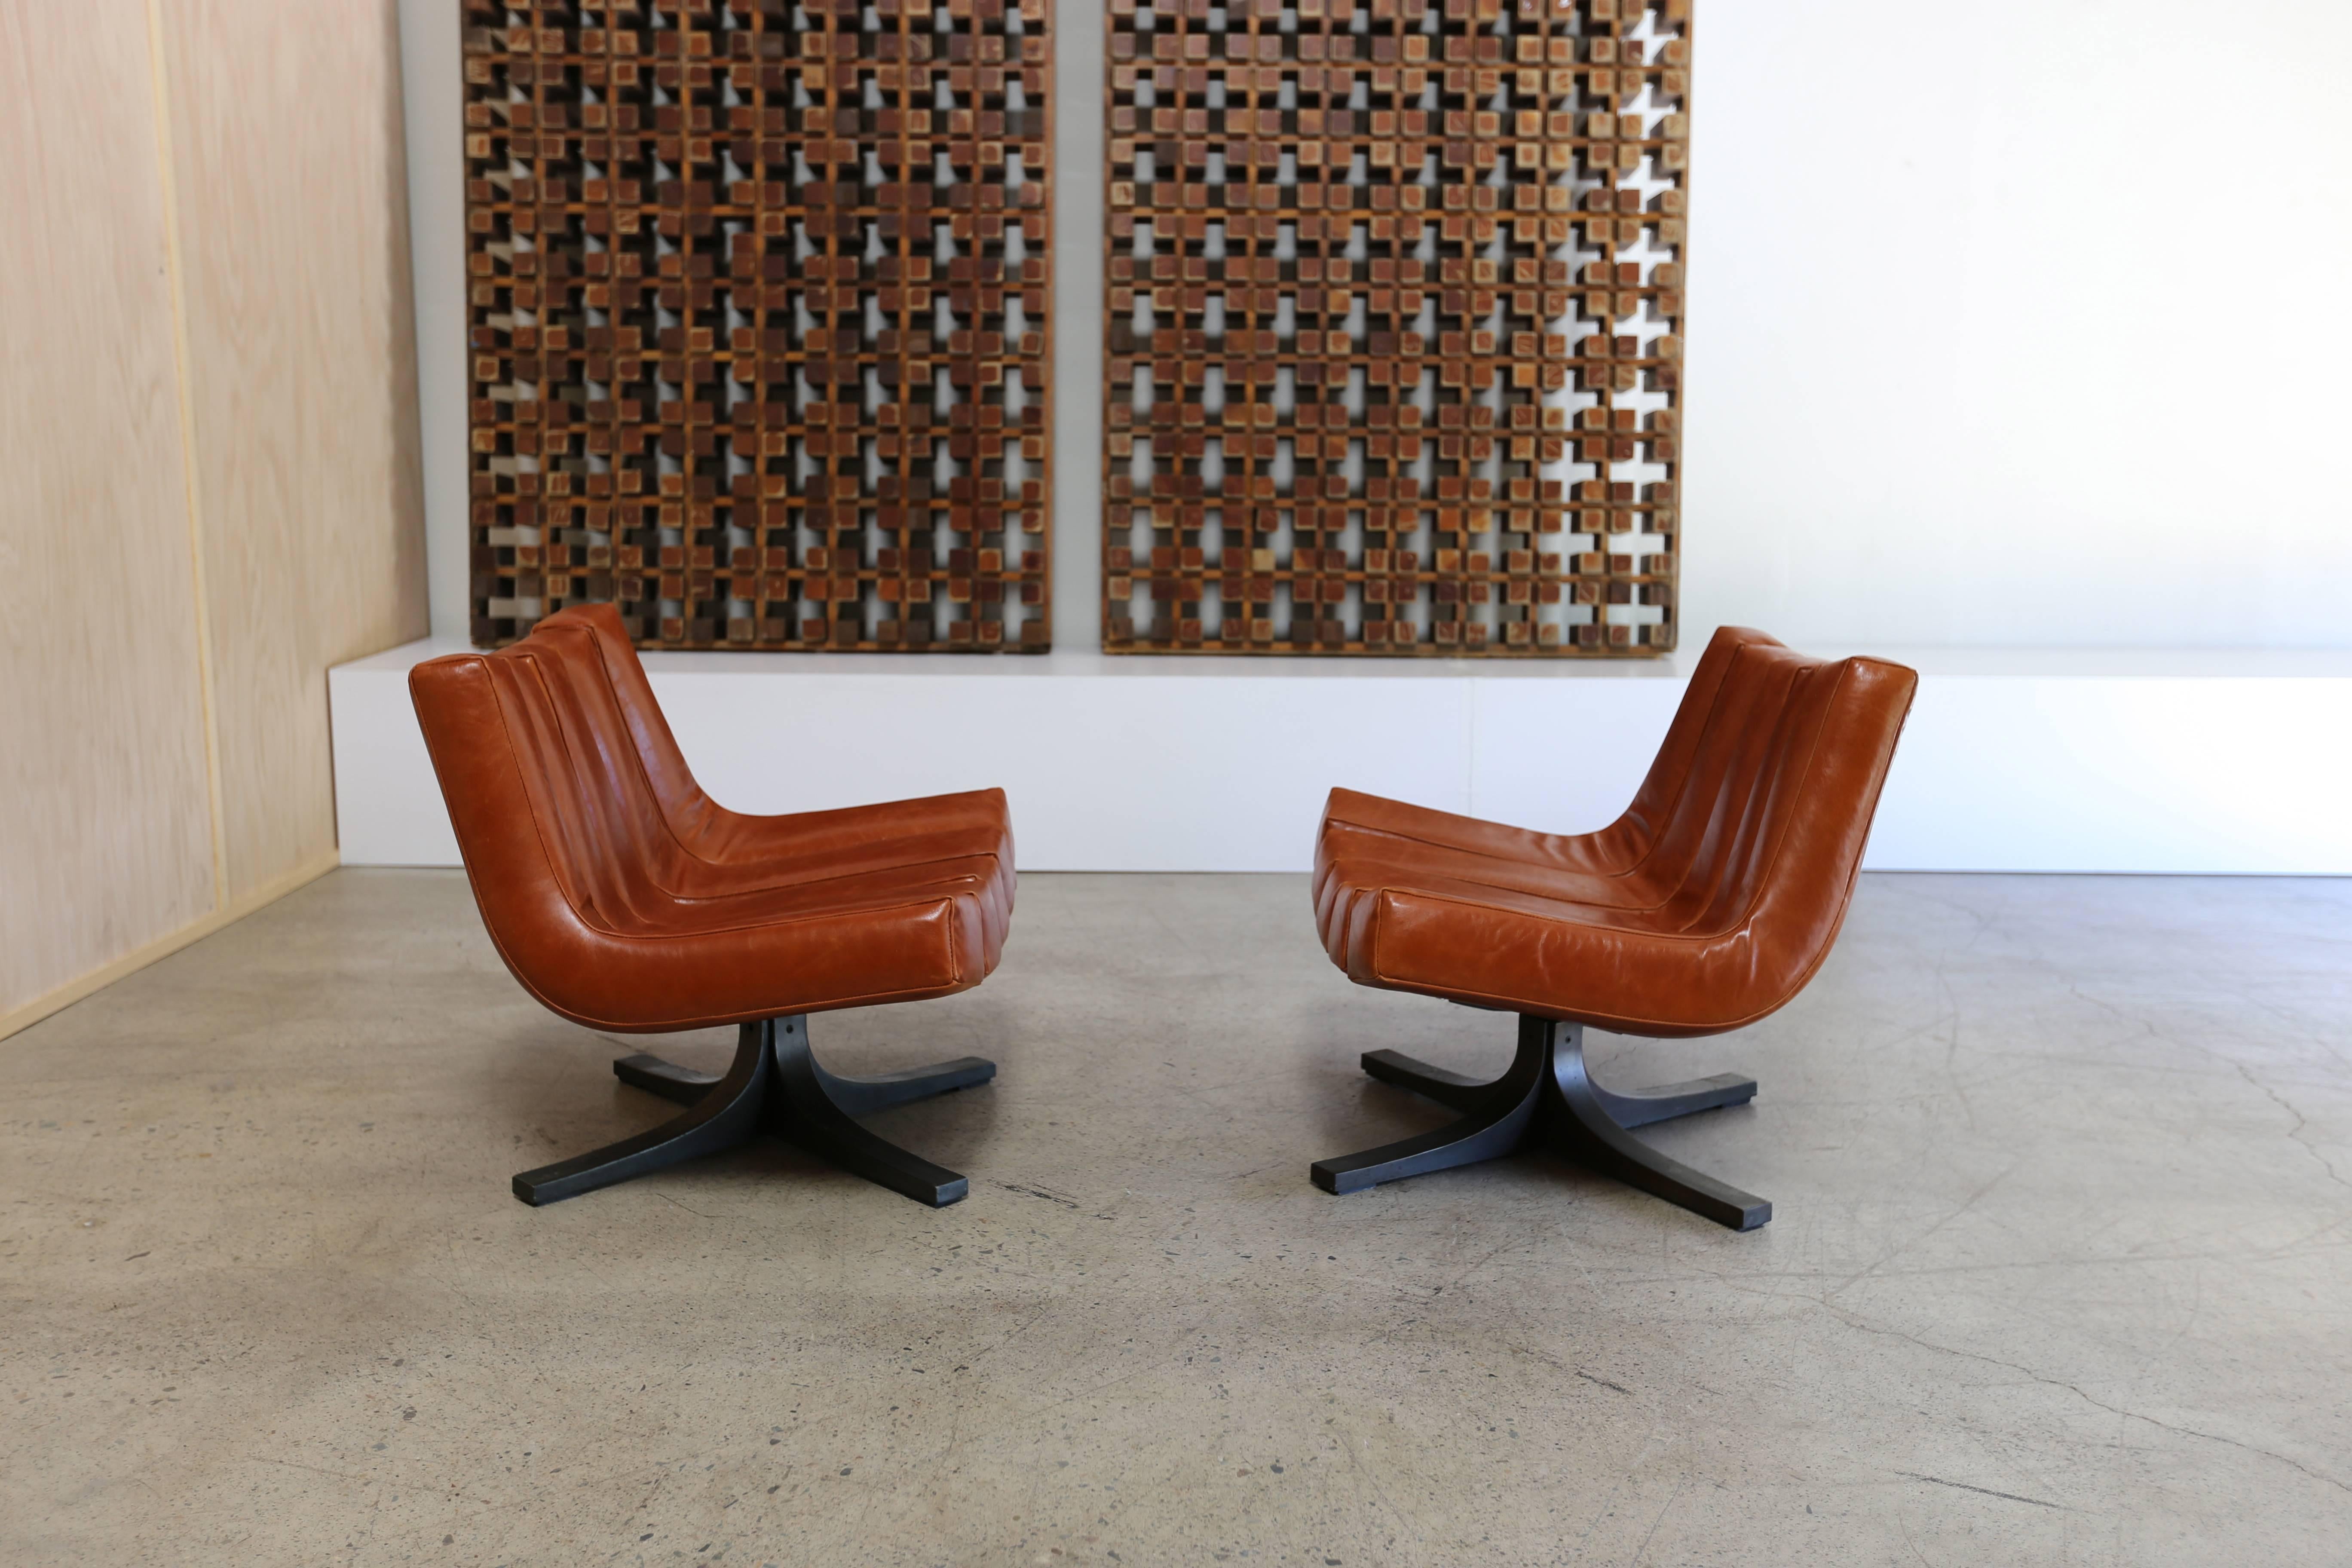 Pair of Swivel lounge chairs by Javier Carvajal. Spain 1972. Leather with bronze-plated steel bases.